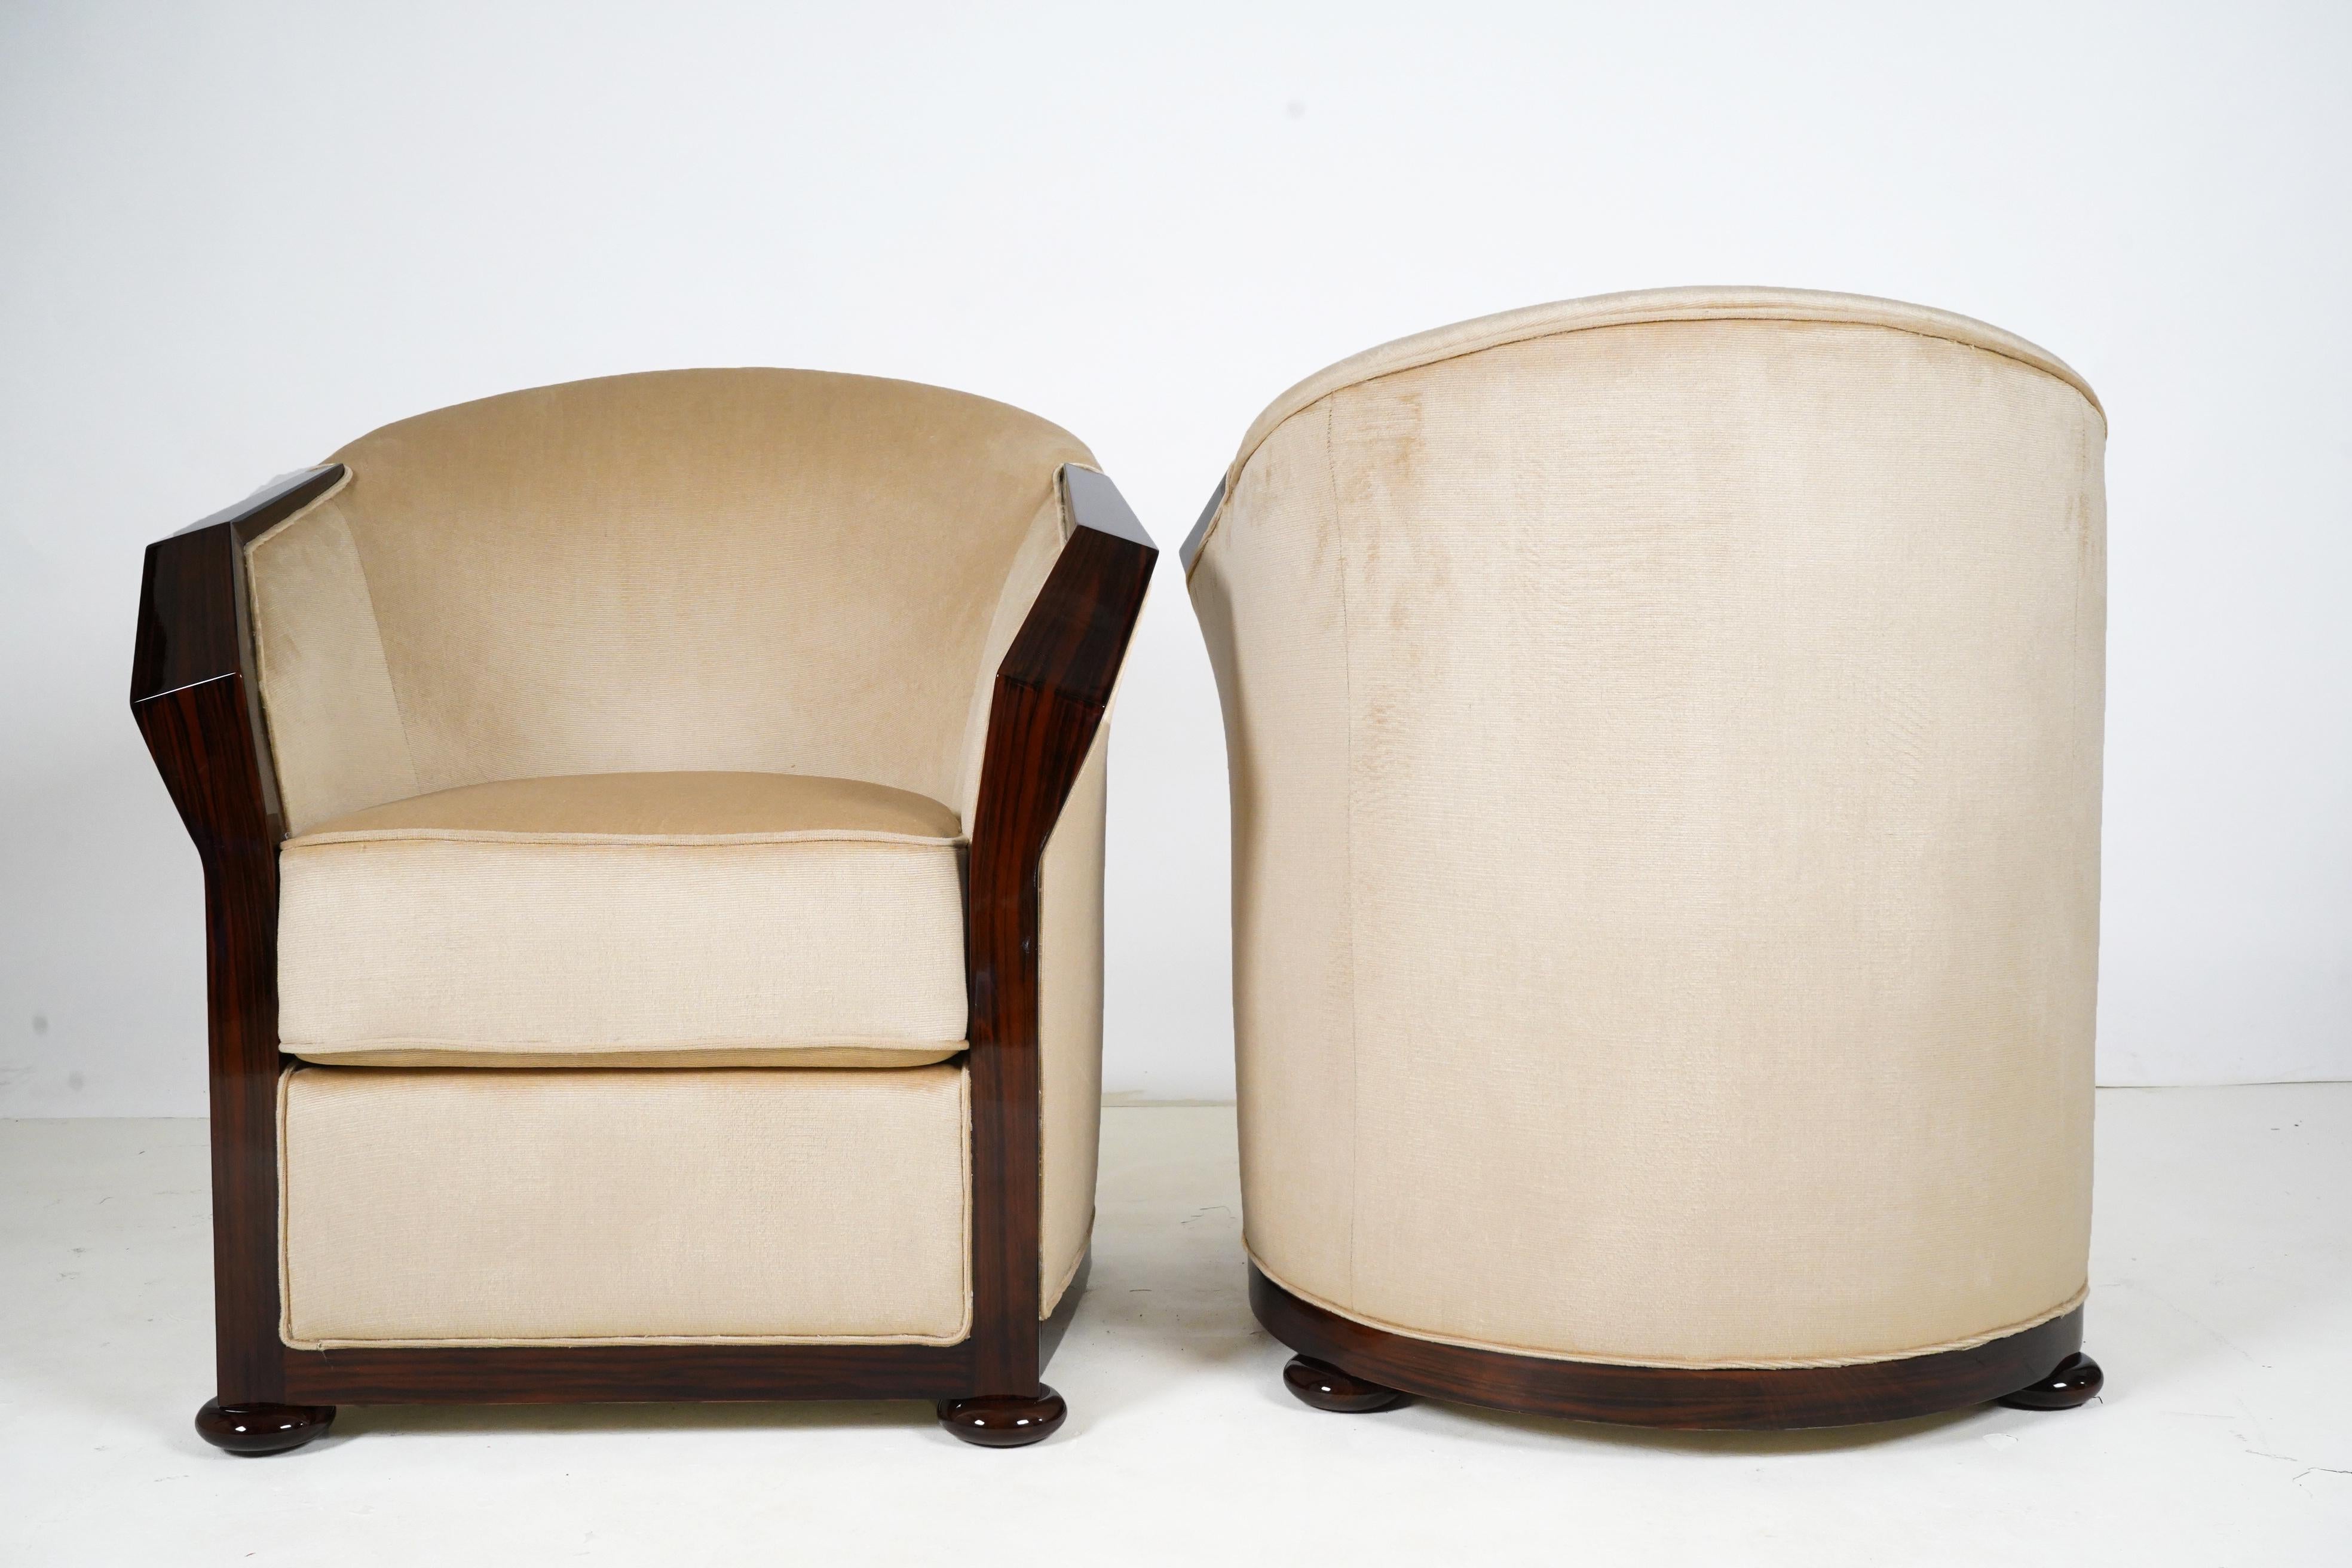 Pair of Art Deco Style Armchairs with Walnut Veneers For Sale 1